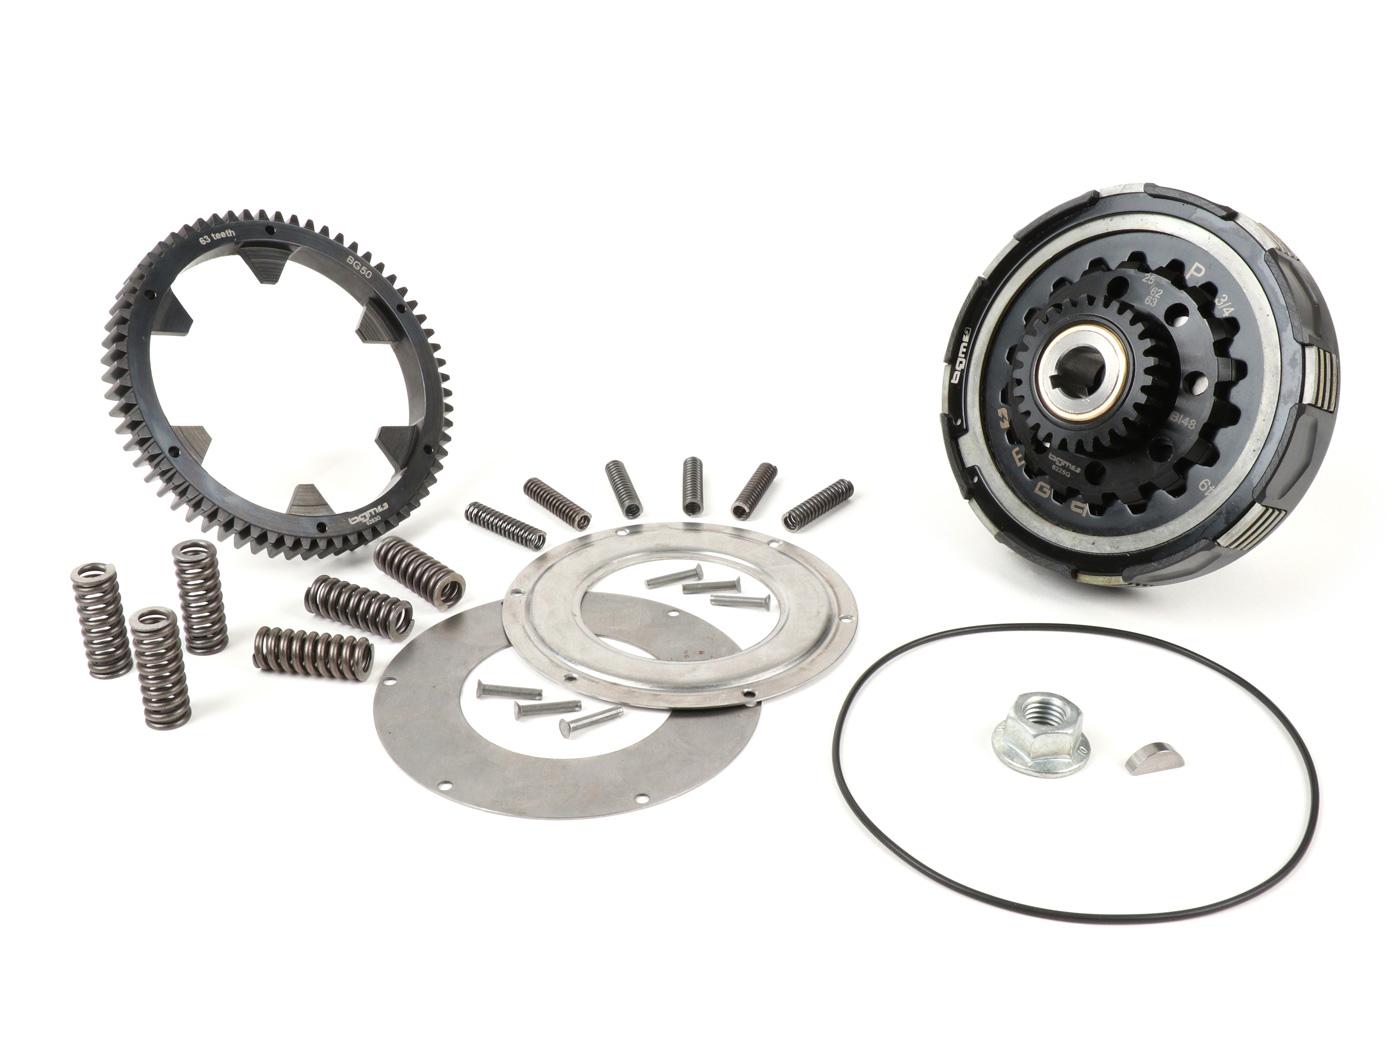 Clutch kit incl. primary transmission pair -BGM Pro Superstrong 2.0 CR80 Ultralube, type Cosa2 / FL- elastic gear BGM Pro 63 teeth (straight) - Vespa PX80, PX125, PX150, PX200, Cosa, T5, Sprint150 Veloce, Rally, GTR, TS125, Super150 ( VBC) -